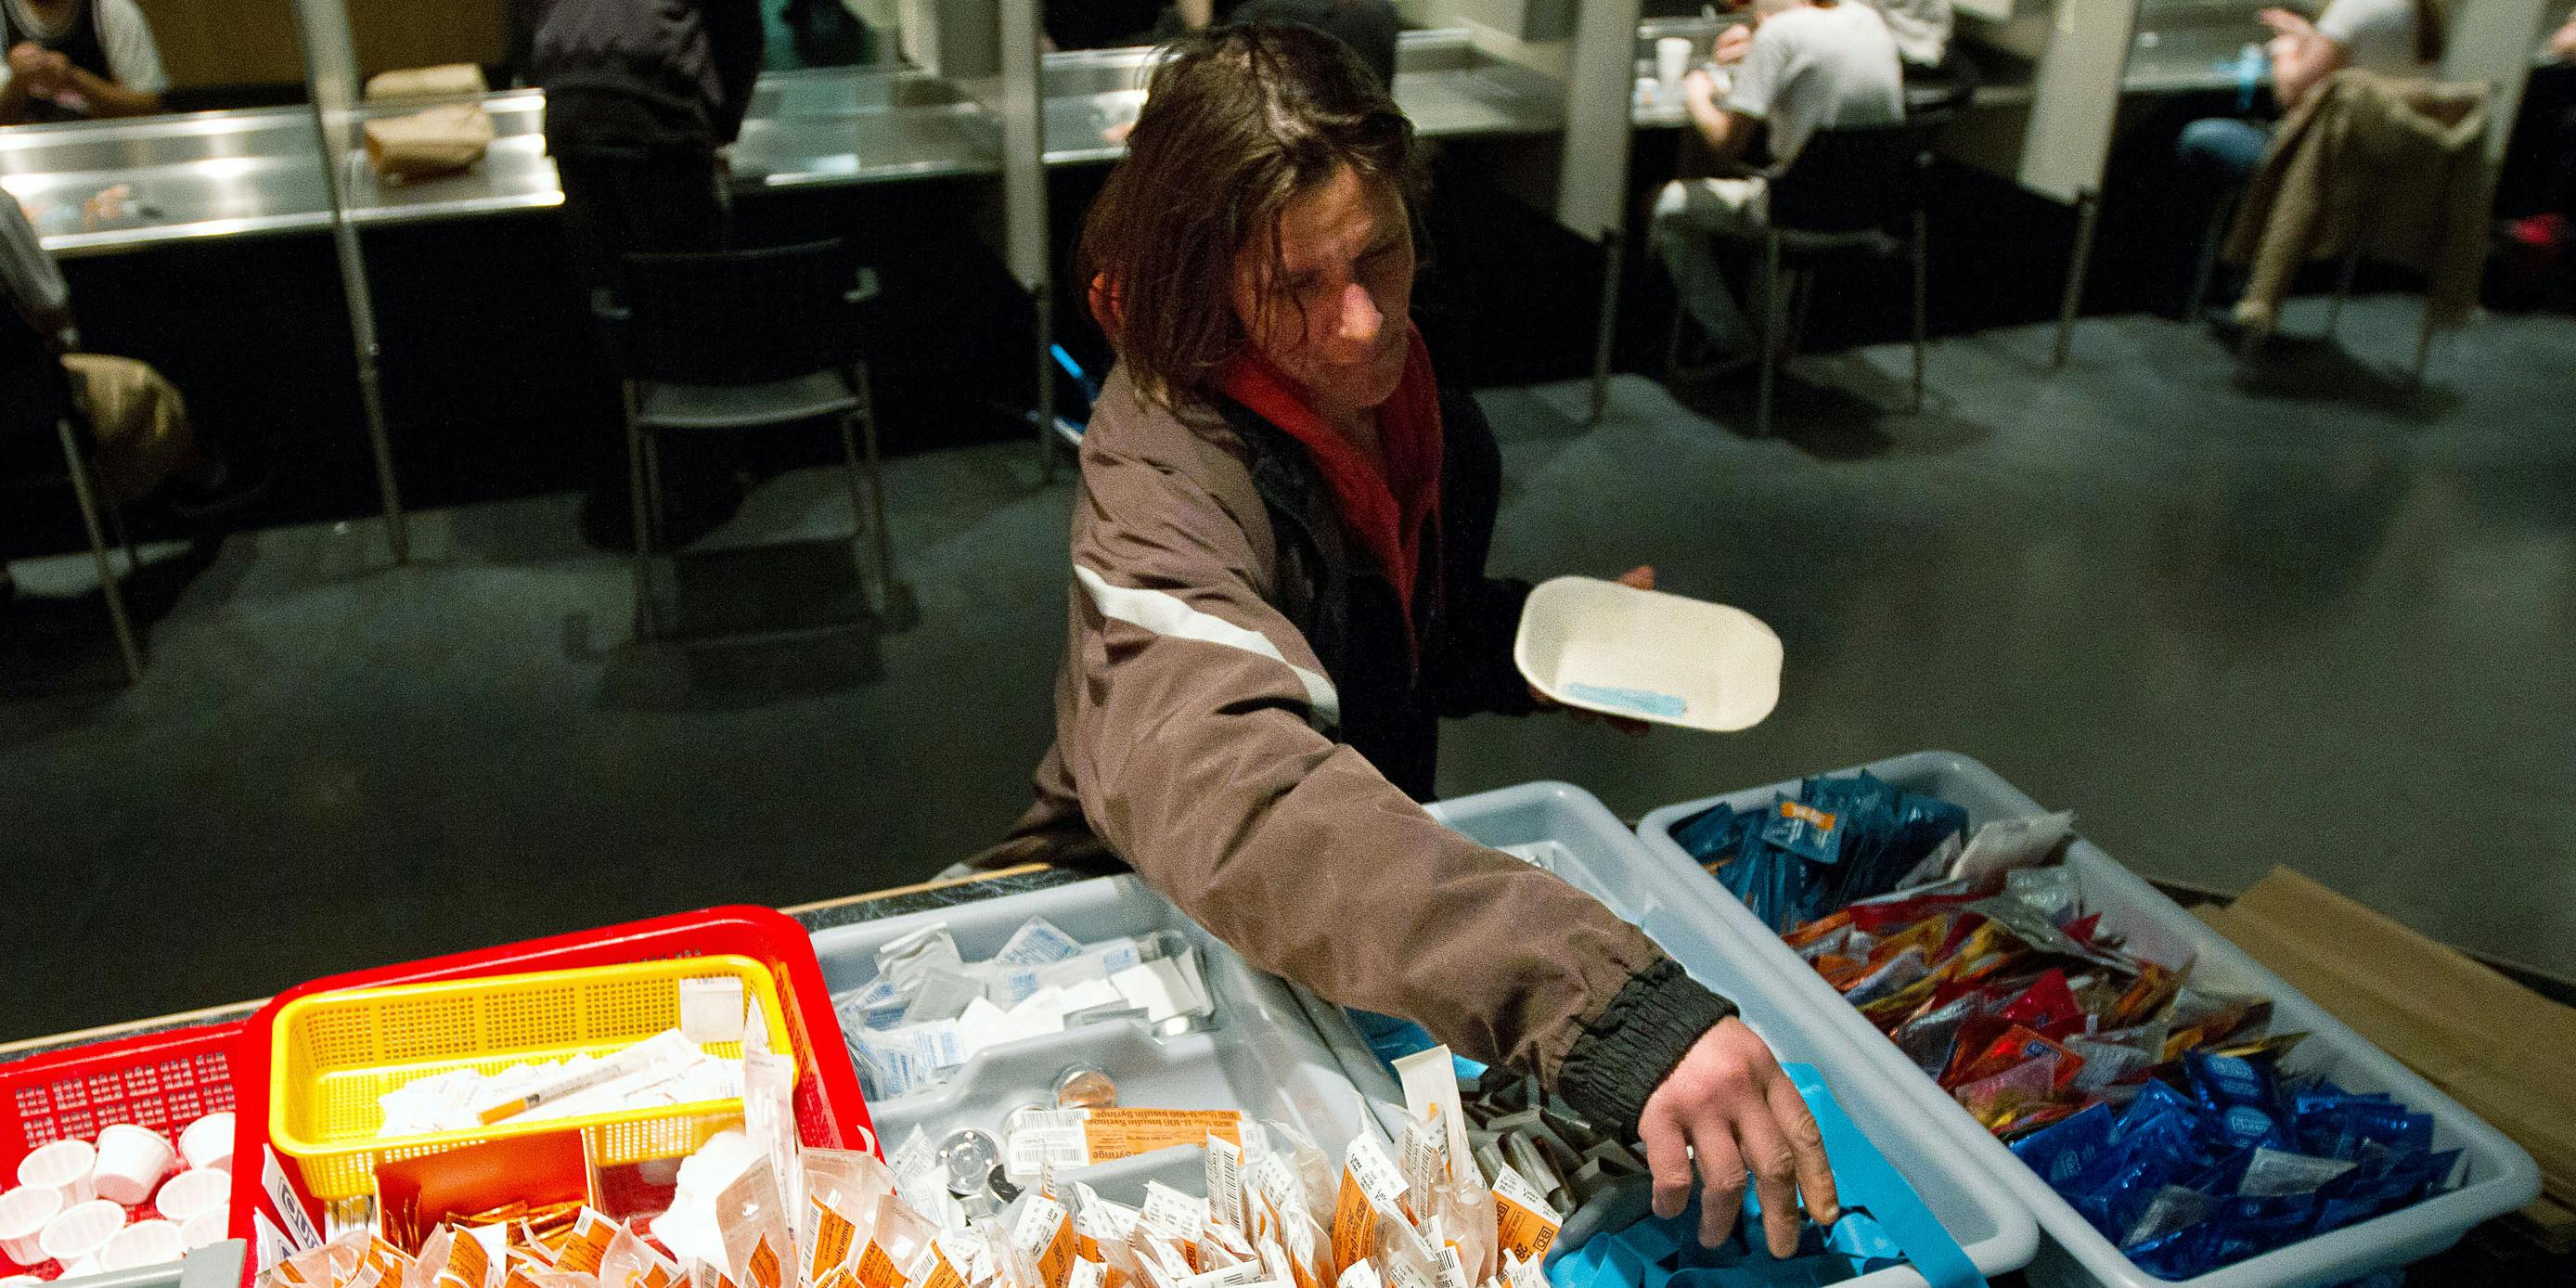 A client of the Insite supervised injection Center in Vancouver, Canada collects her kit on May 3, 2011. Toronto Public Health is currently calling on Canada to decriminalizes all drugs. (Photo by Laurent Vu The/AFP via Getty Images)